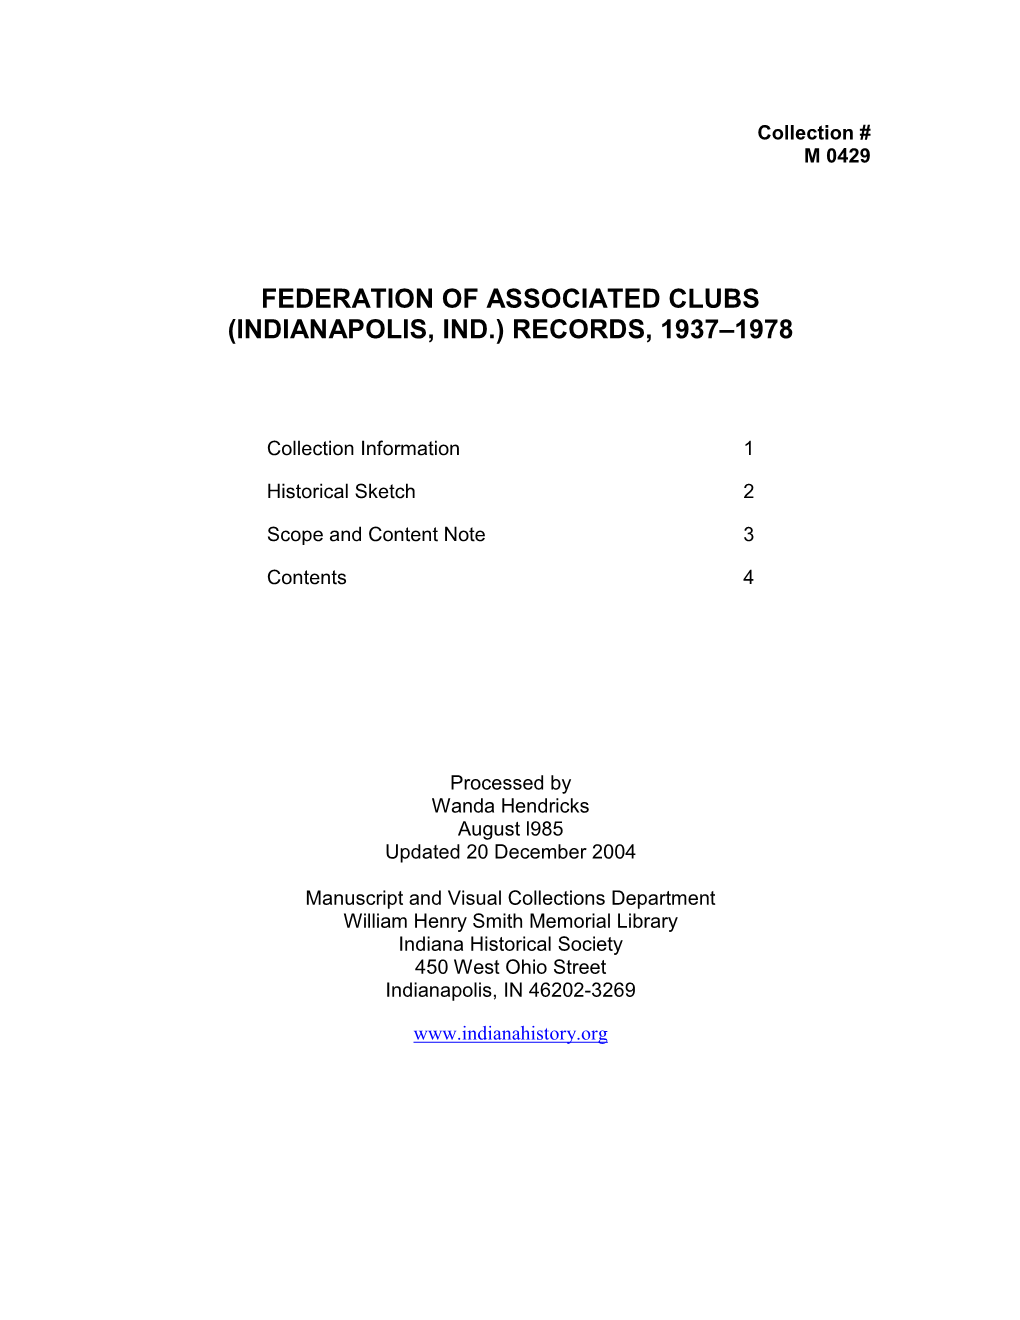 Federation of Associated Clubs (Indianapolis, Ind.) Records, 1937–1978